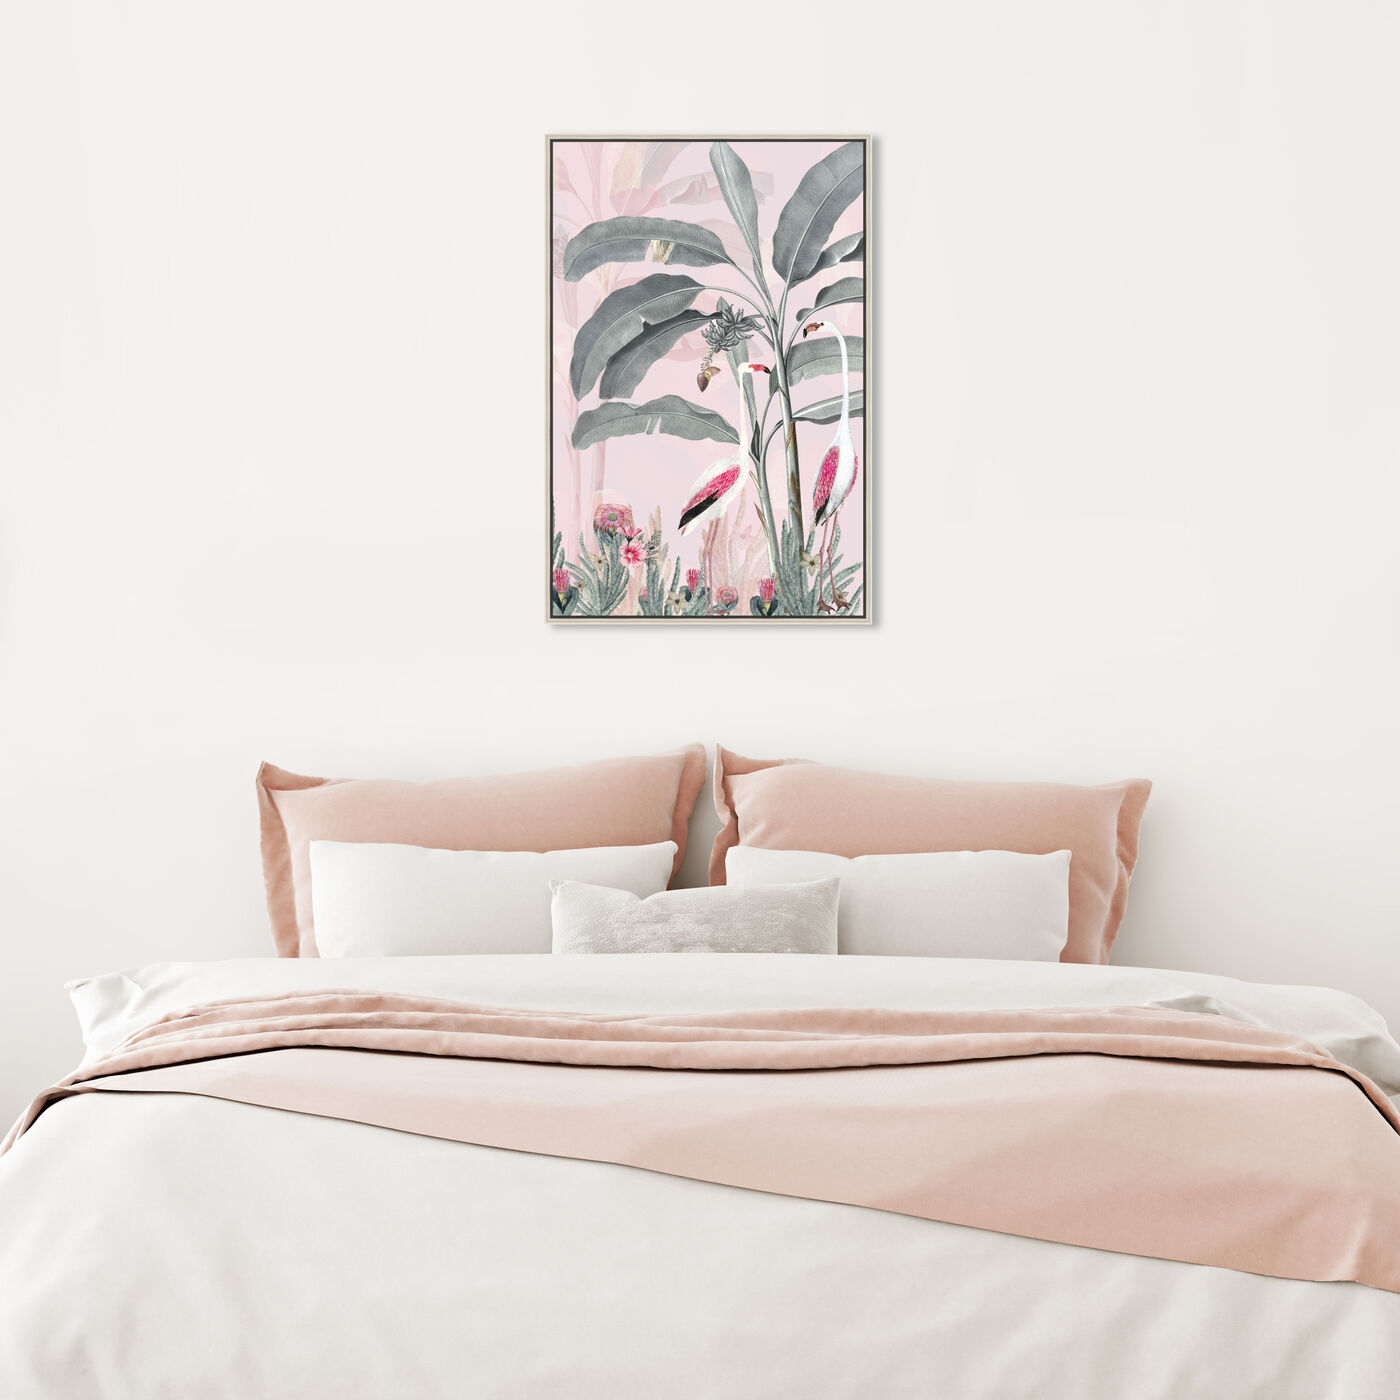 Hanging view of Flamingo Pink featuring animals and birds art.